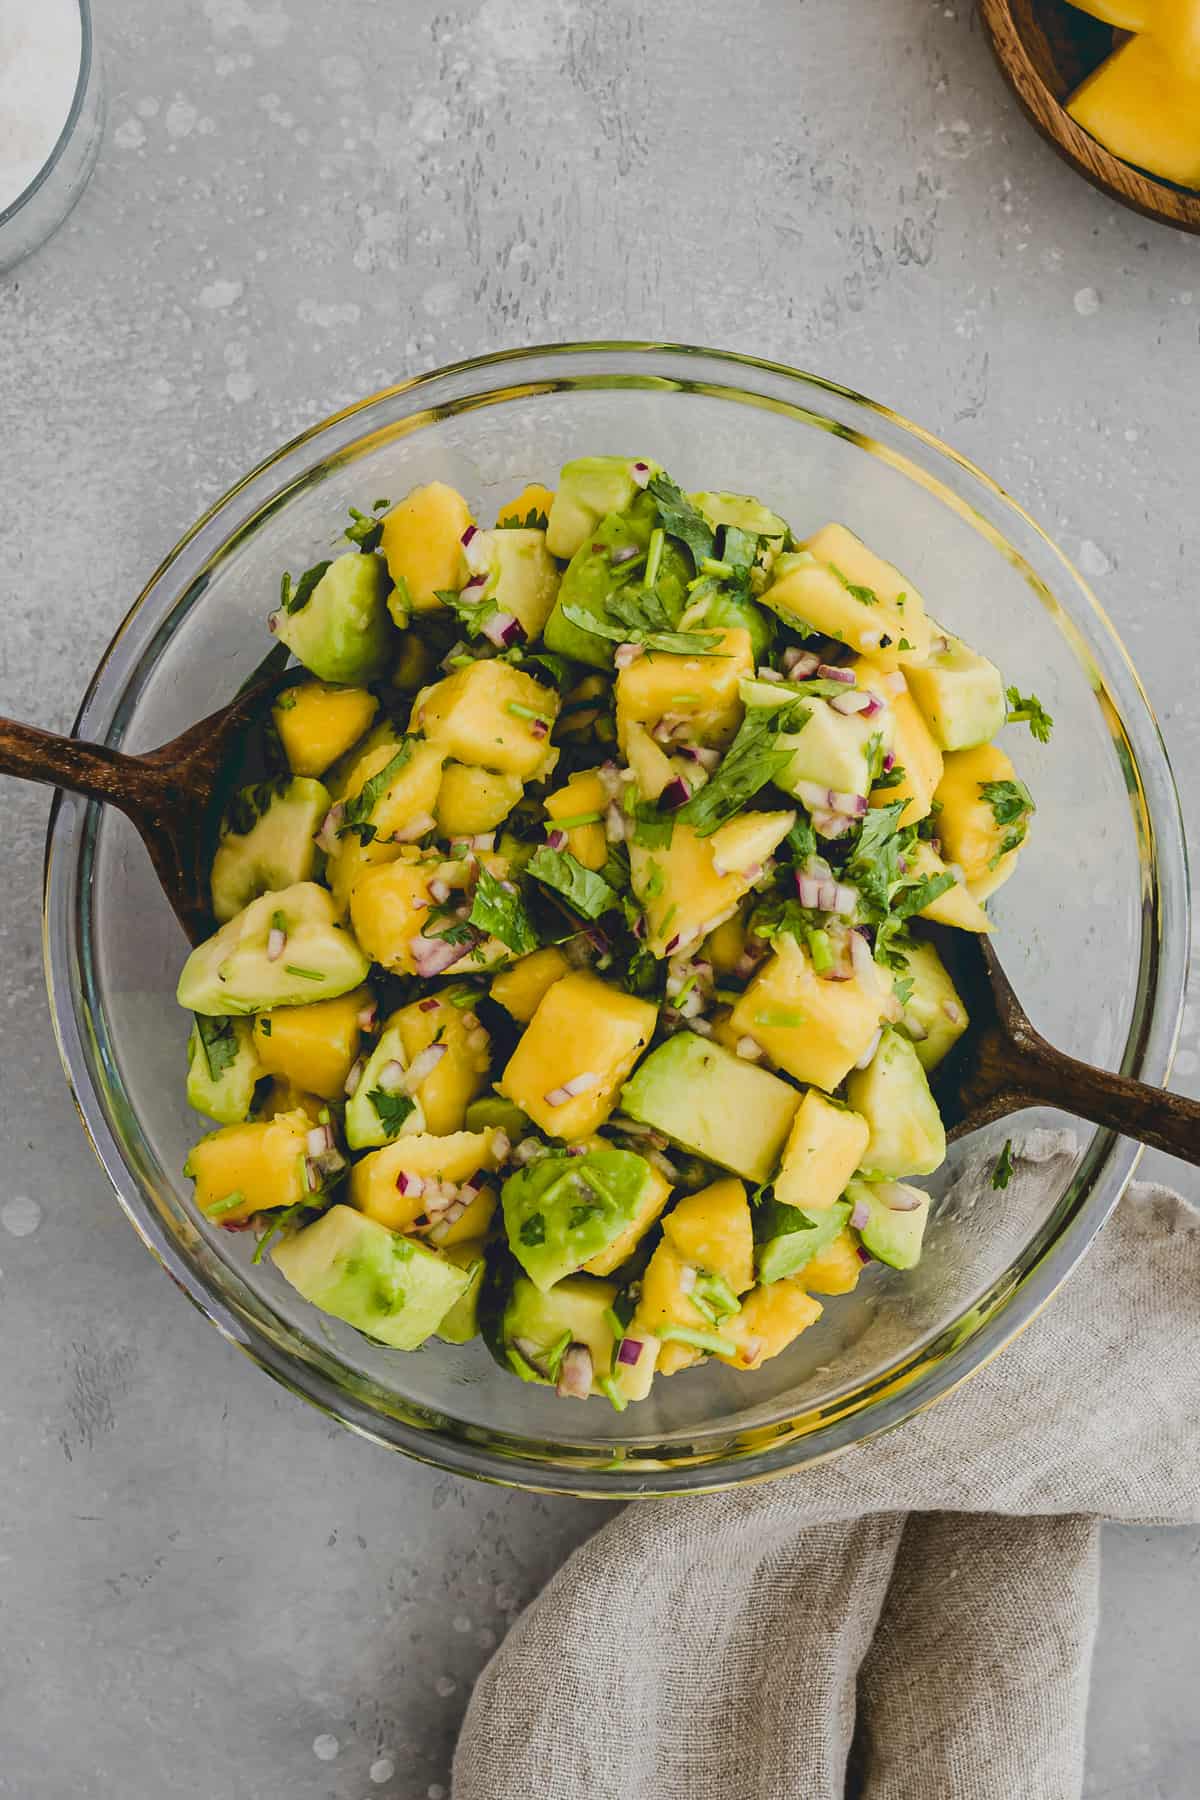 Top view of a glass bowl filled with avocado mango salad with wooden spoons in it for serving. 